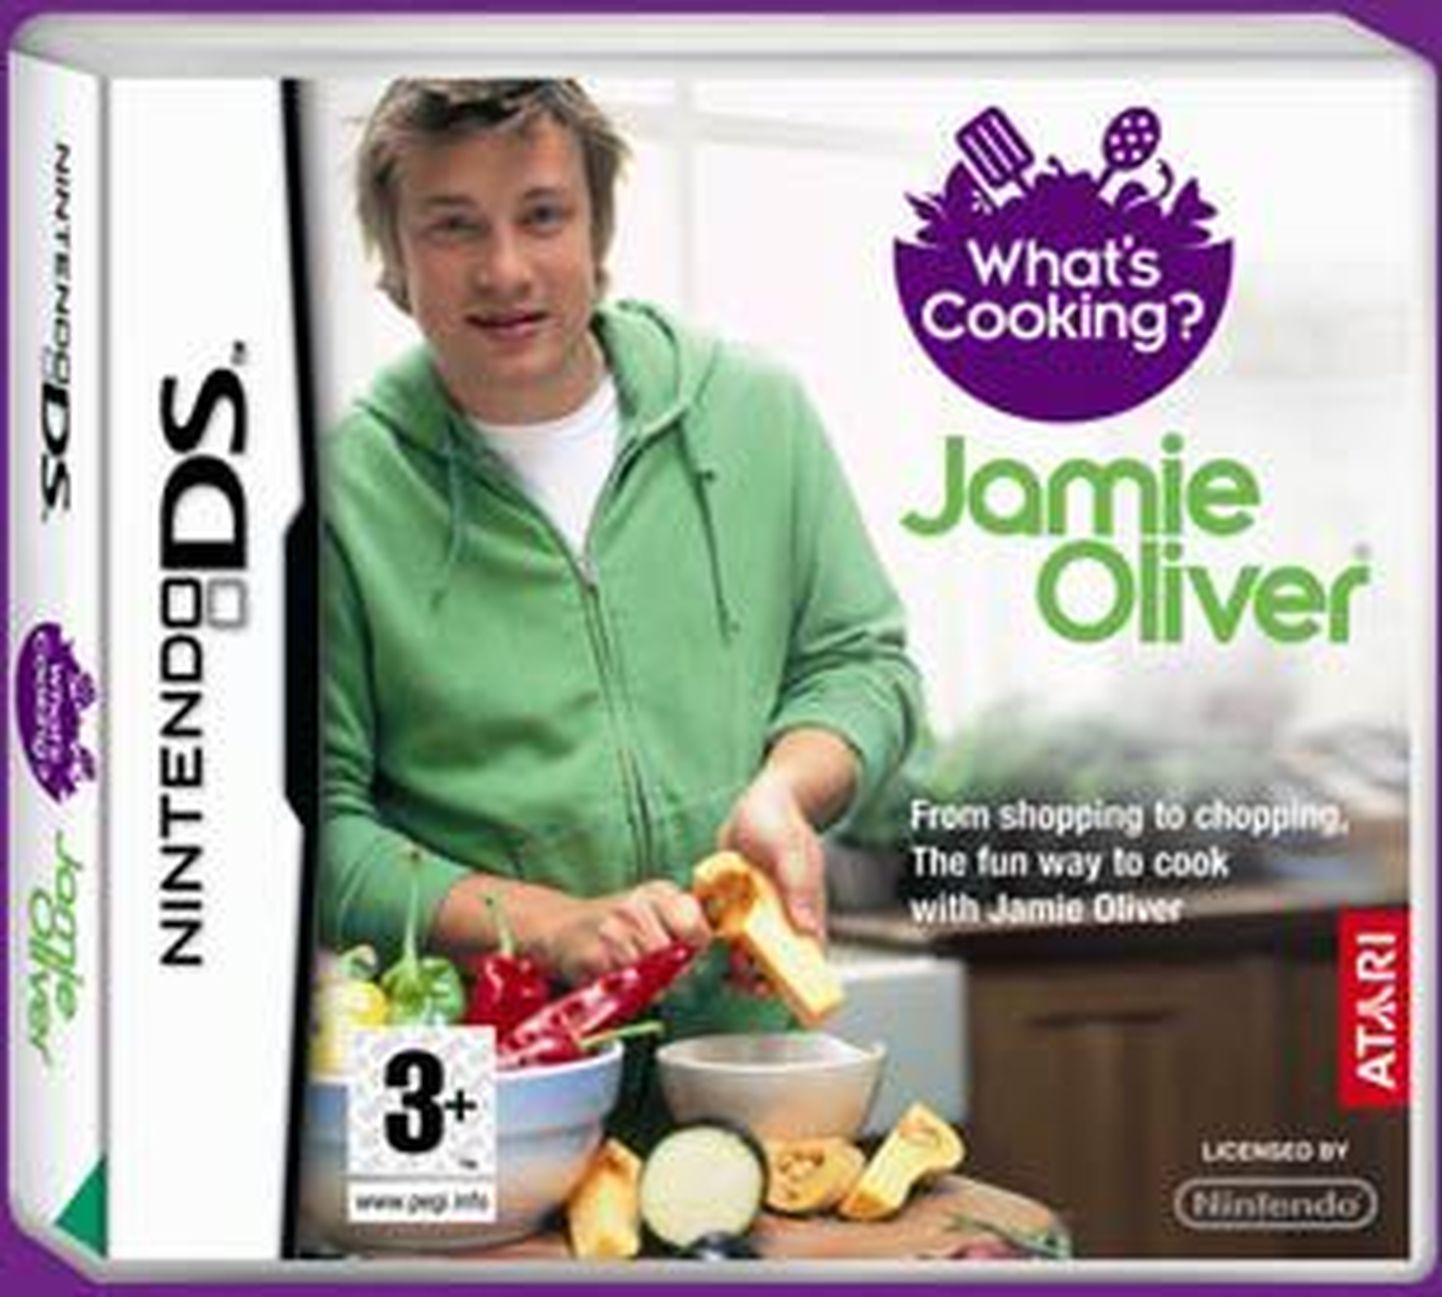 Kokkamismäng «What's Cooking? With Jamie Oliver».